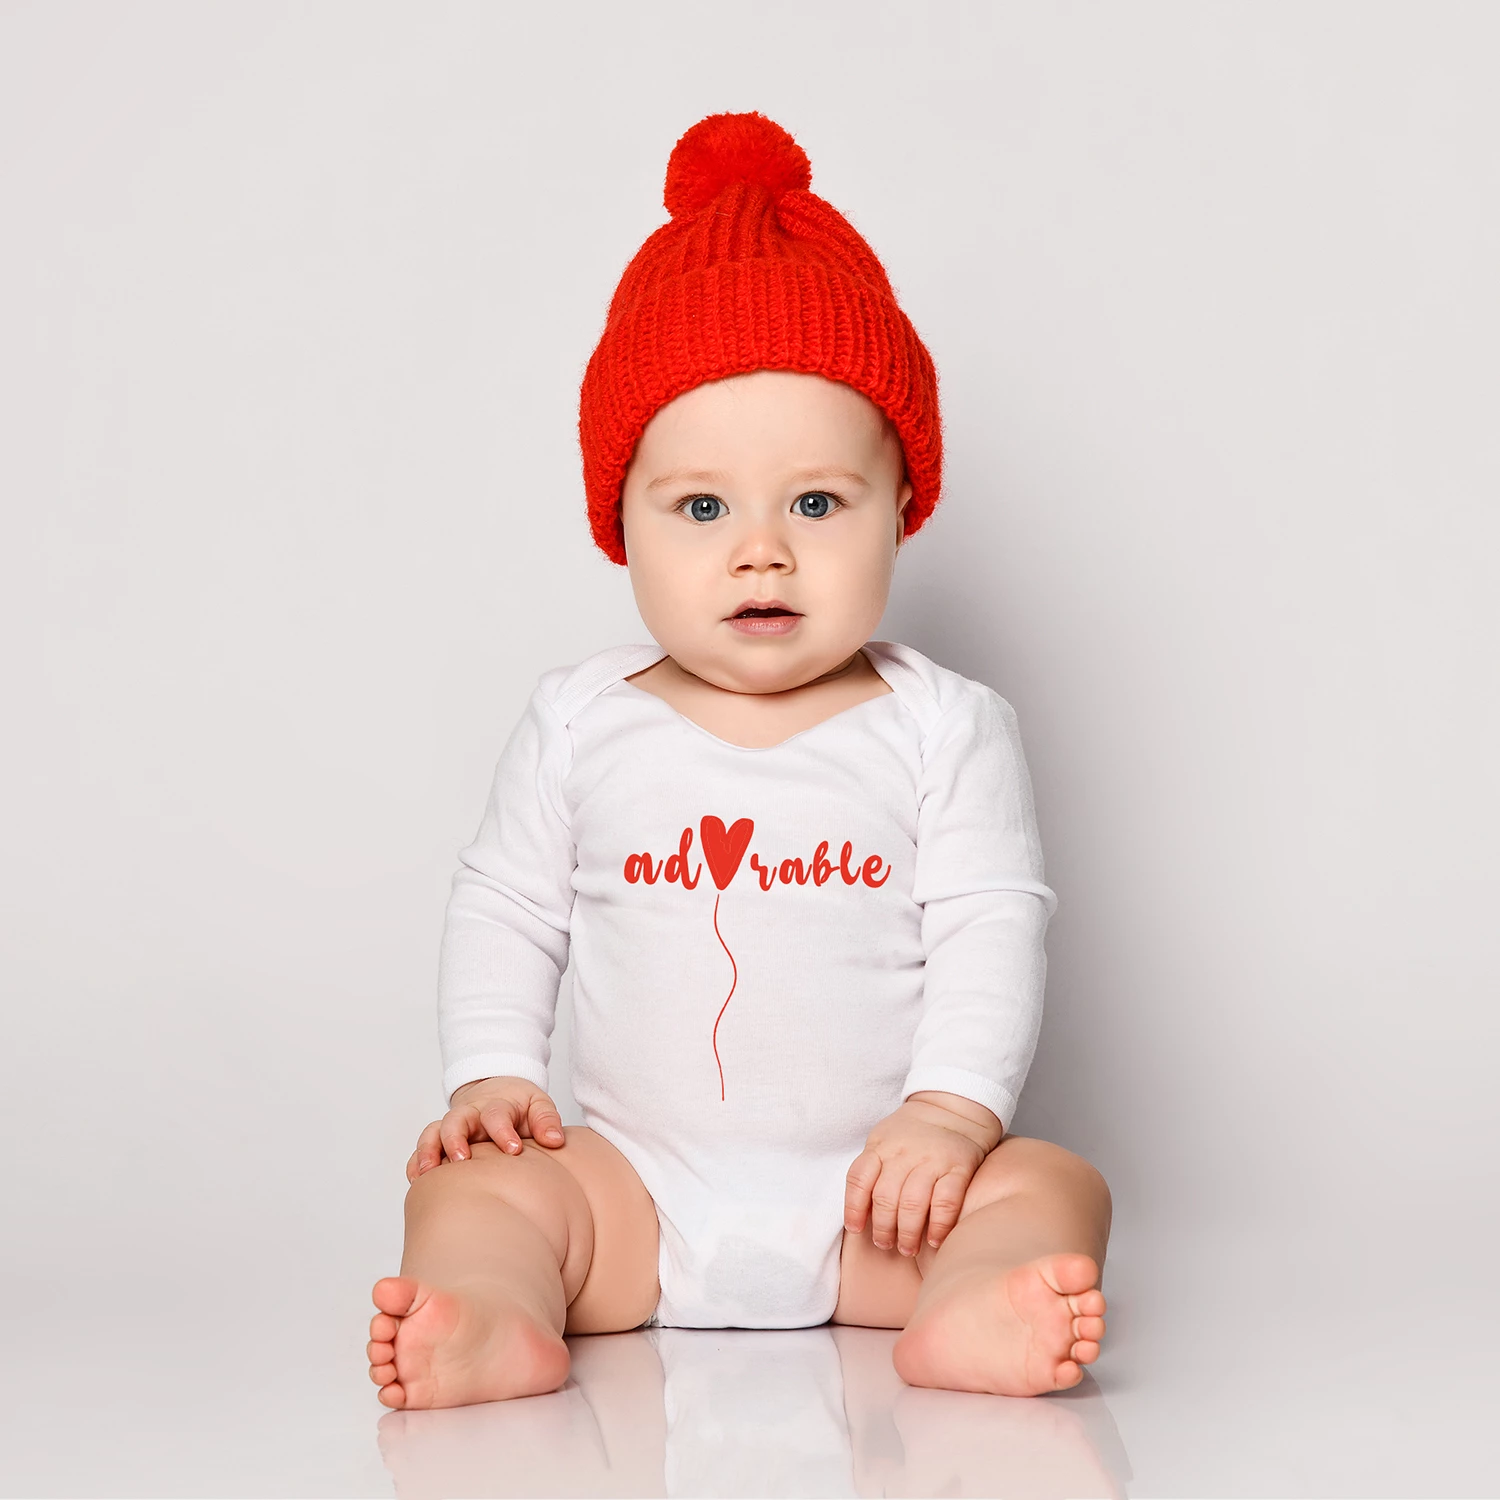 Baby onesie for boys and girls, adorable